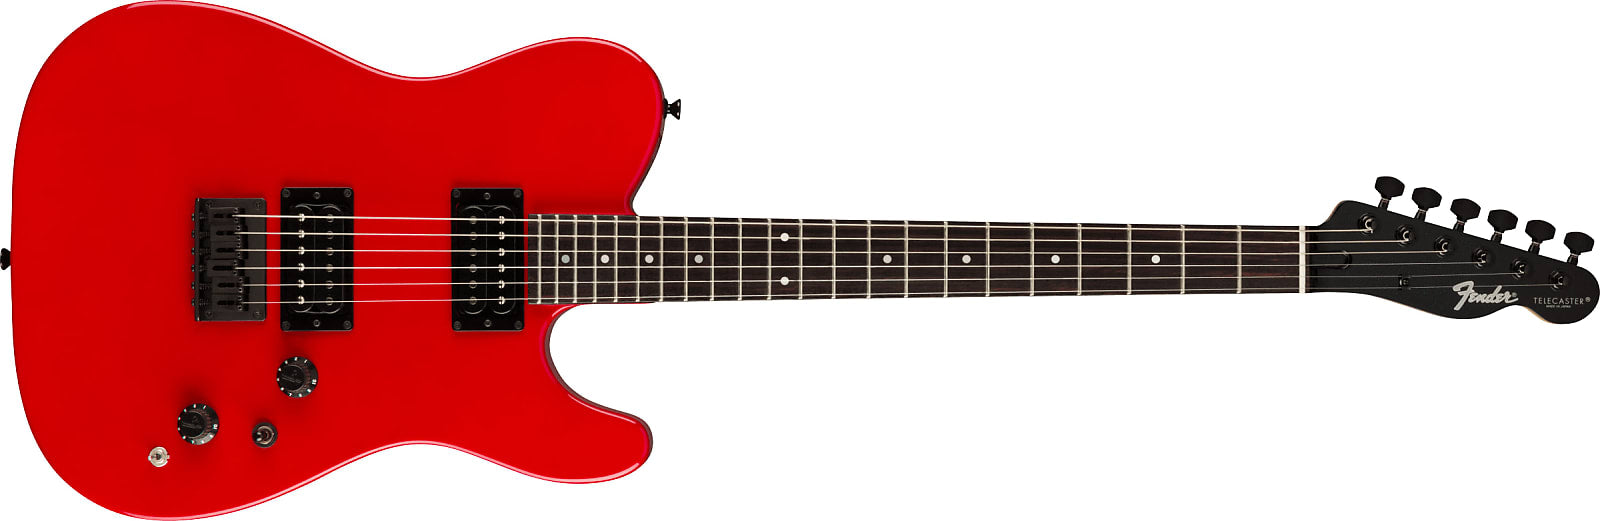 Fender Boxer Series Telecaster HH, Rosewood Fingerboard, Torino Red